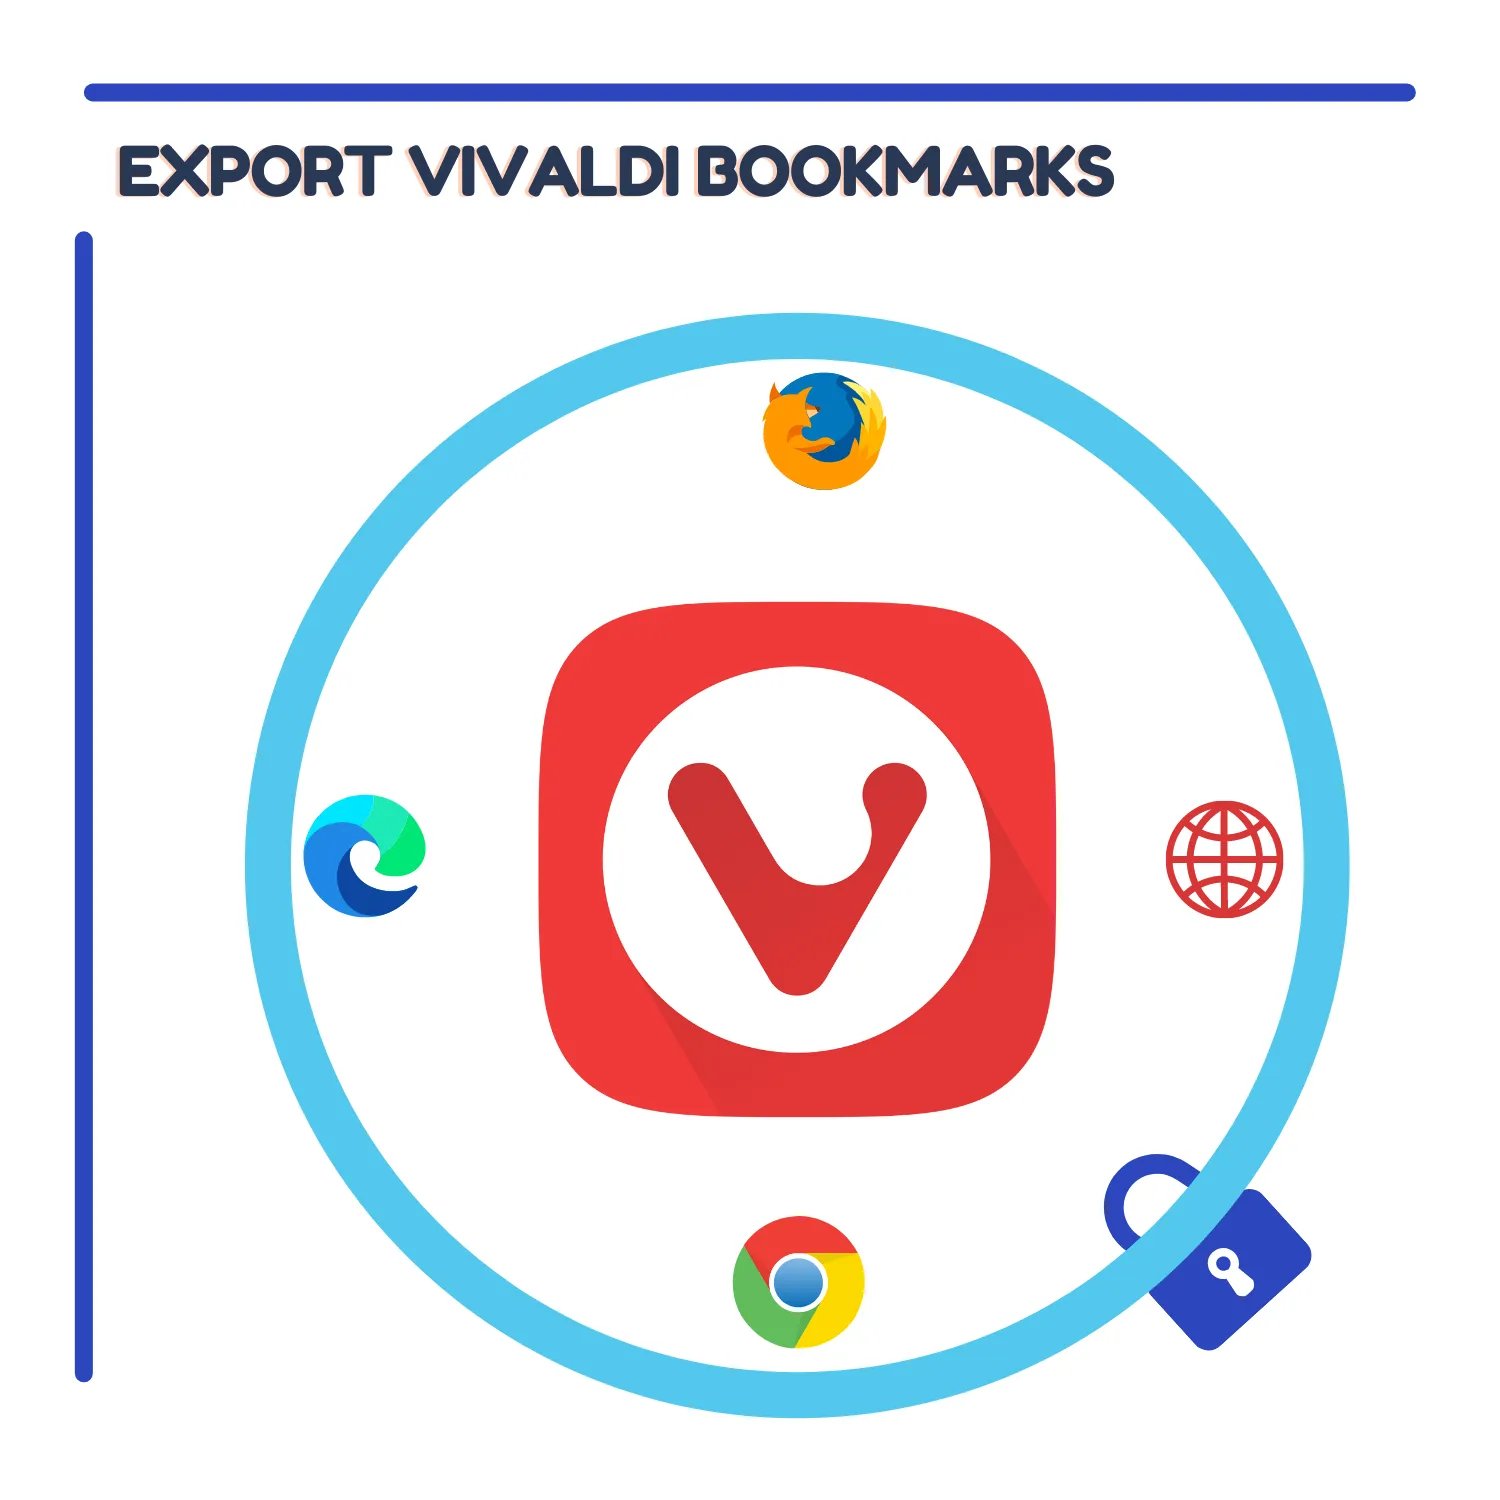 How to Import and Export Bookmarks in Vivaldi